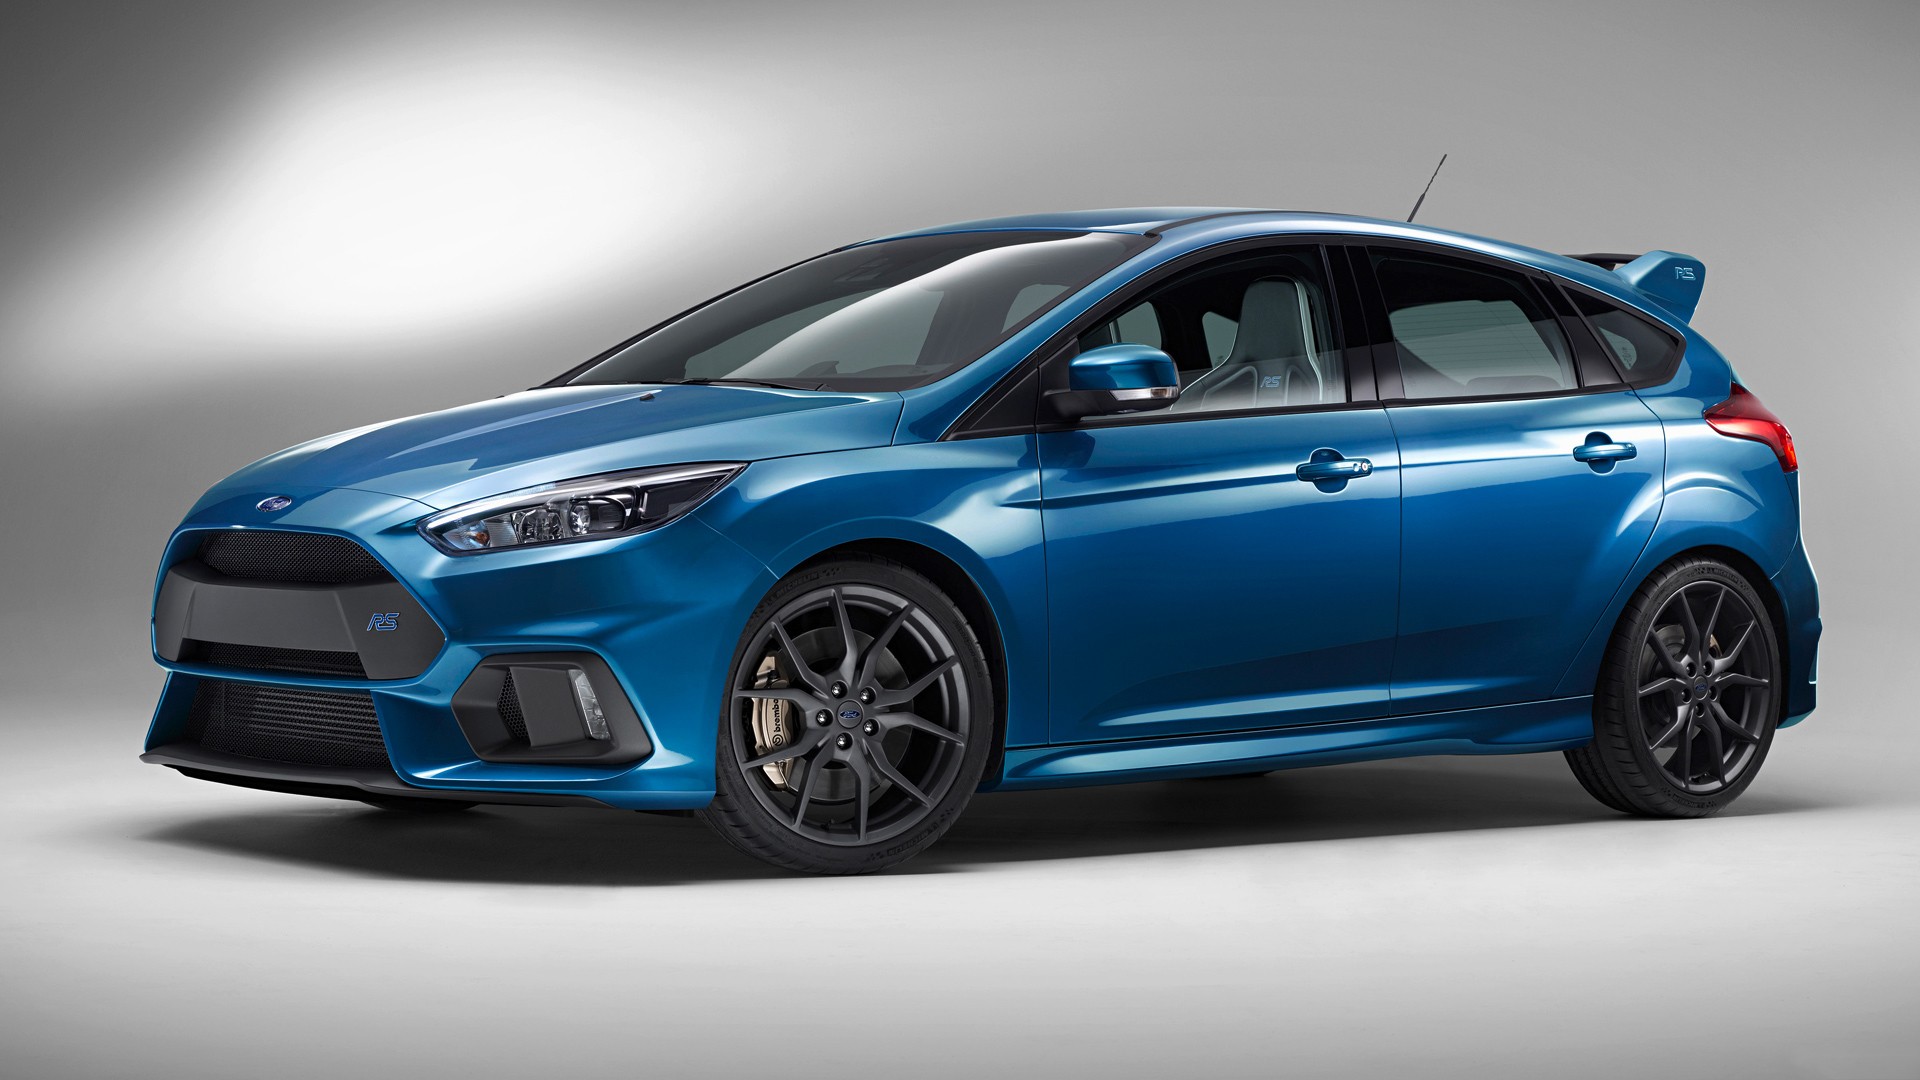 General 1920x1080 Ford Focus RS car blue cars Ford Ford Focus vehicle British cars hatchbacks hot hatch